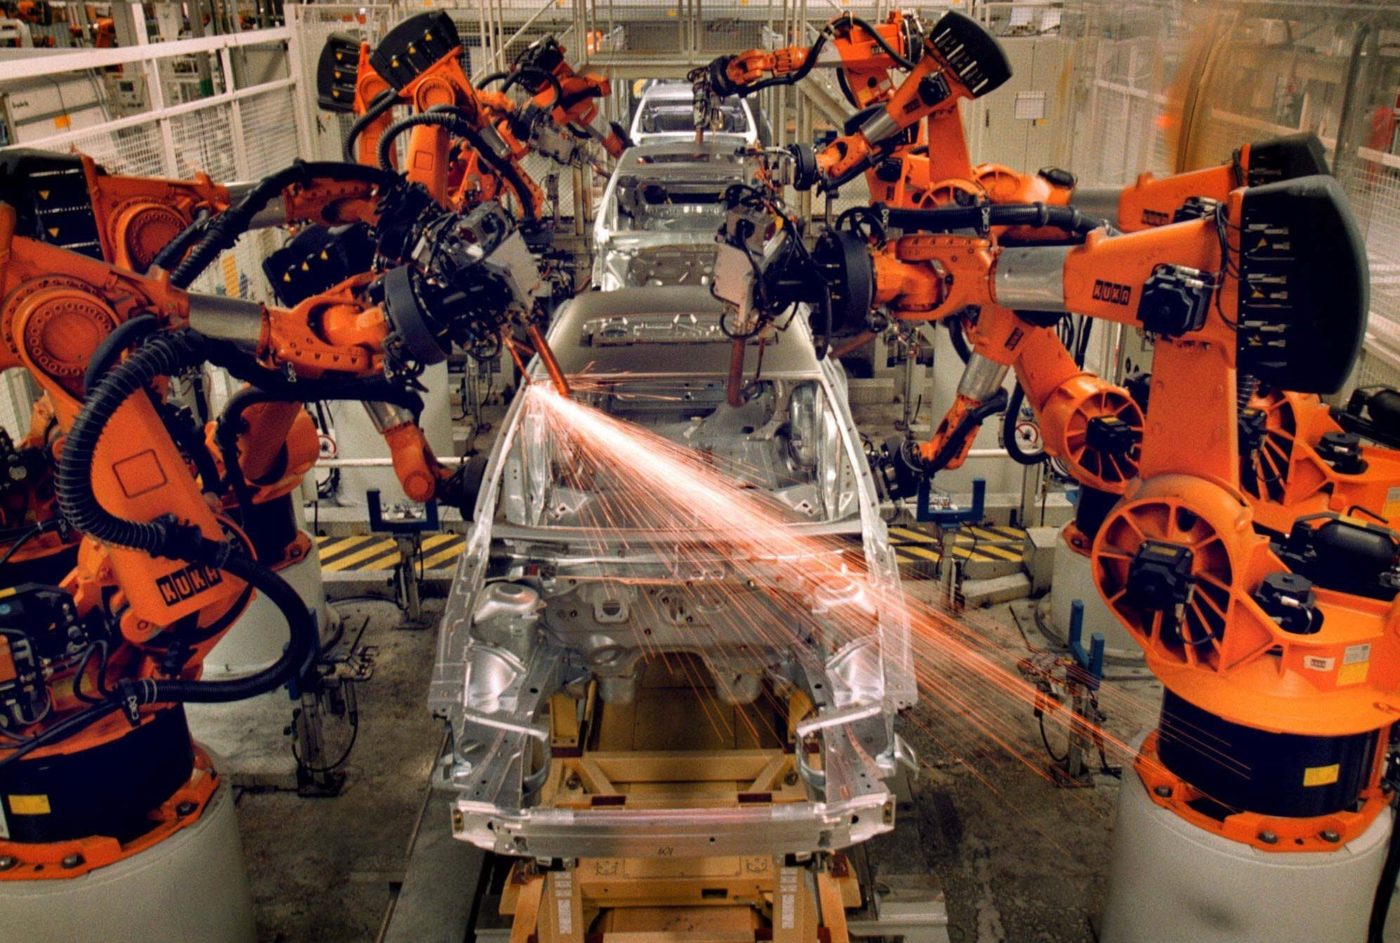 Image Source: http://i1-news.softpedia-static.com/images/news2/assembly-robot-kills-worker-at-volkswagen-plant-in-germany-485851-2.jpg